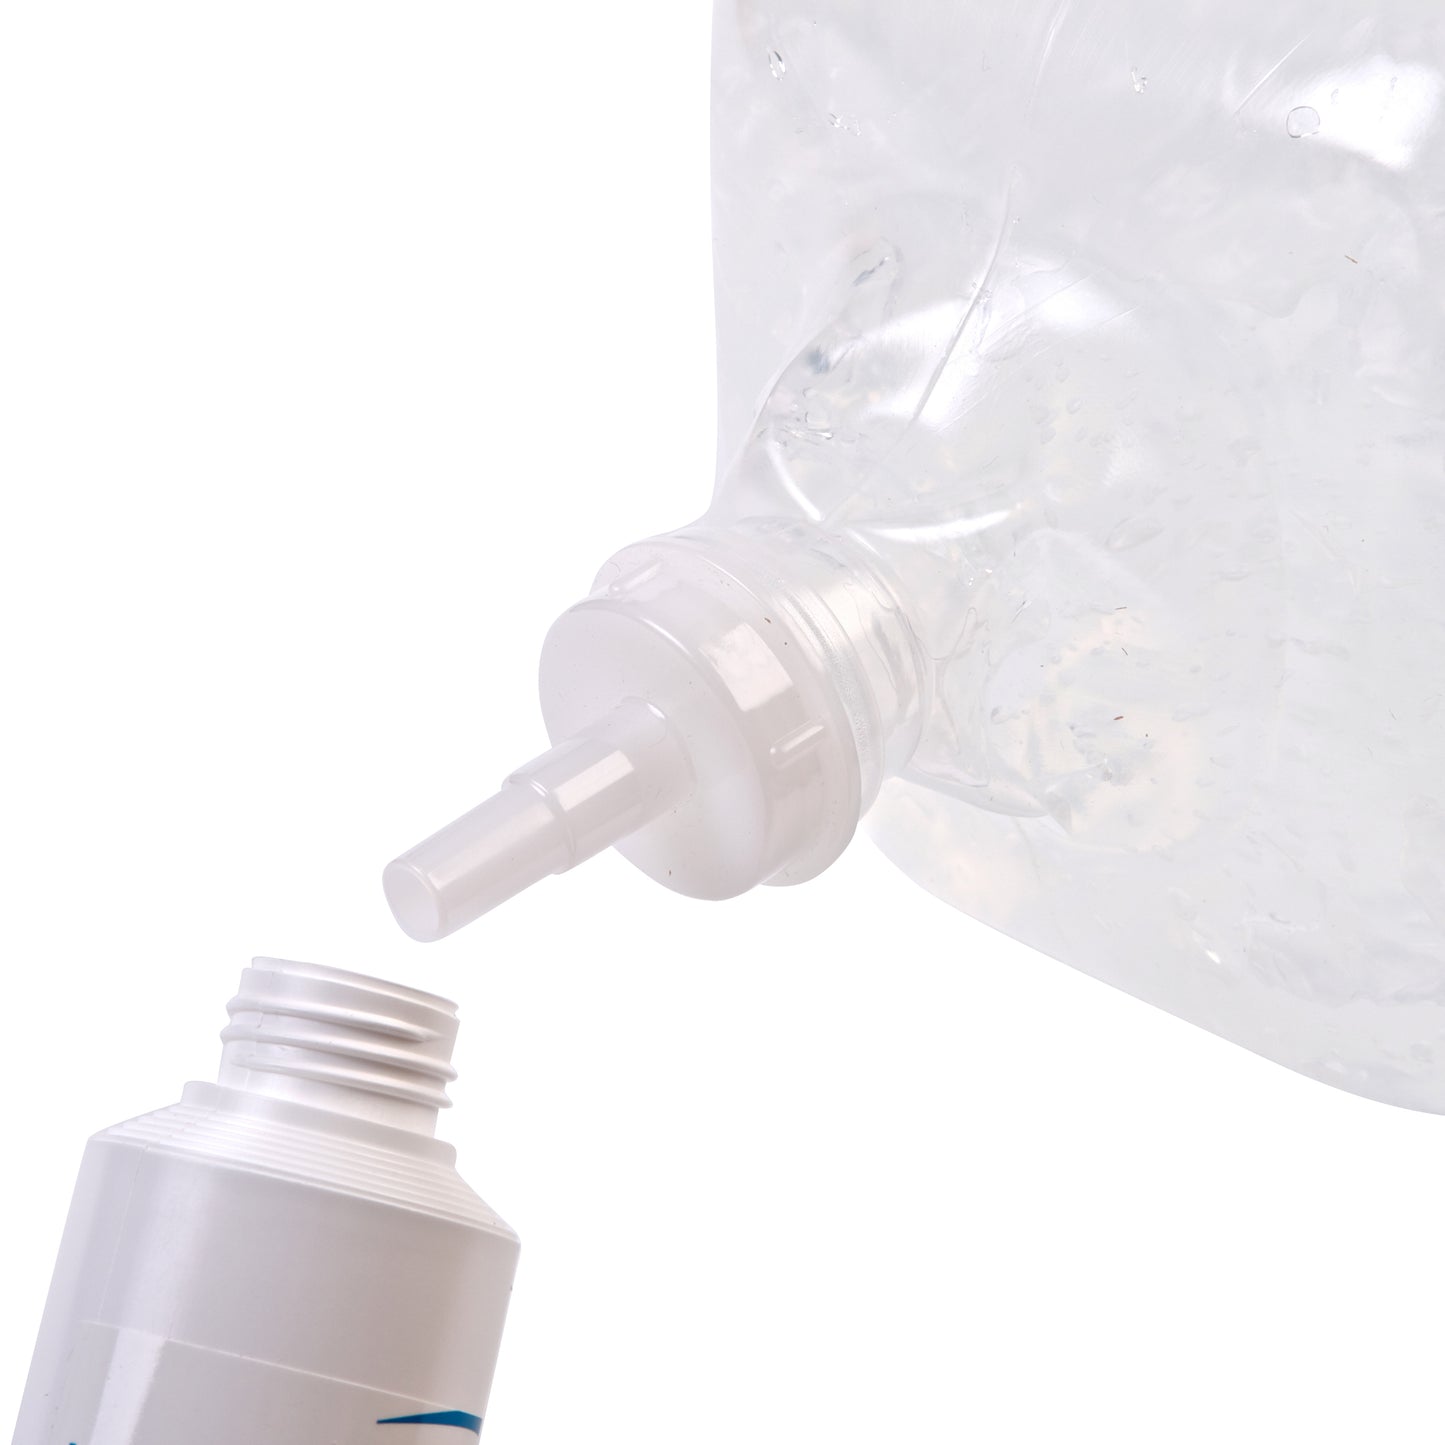 Healthlife Ultrasound Clear Gel 5 Litre Cubitainer With FREE Refill Bottle - Case of 4